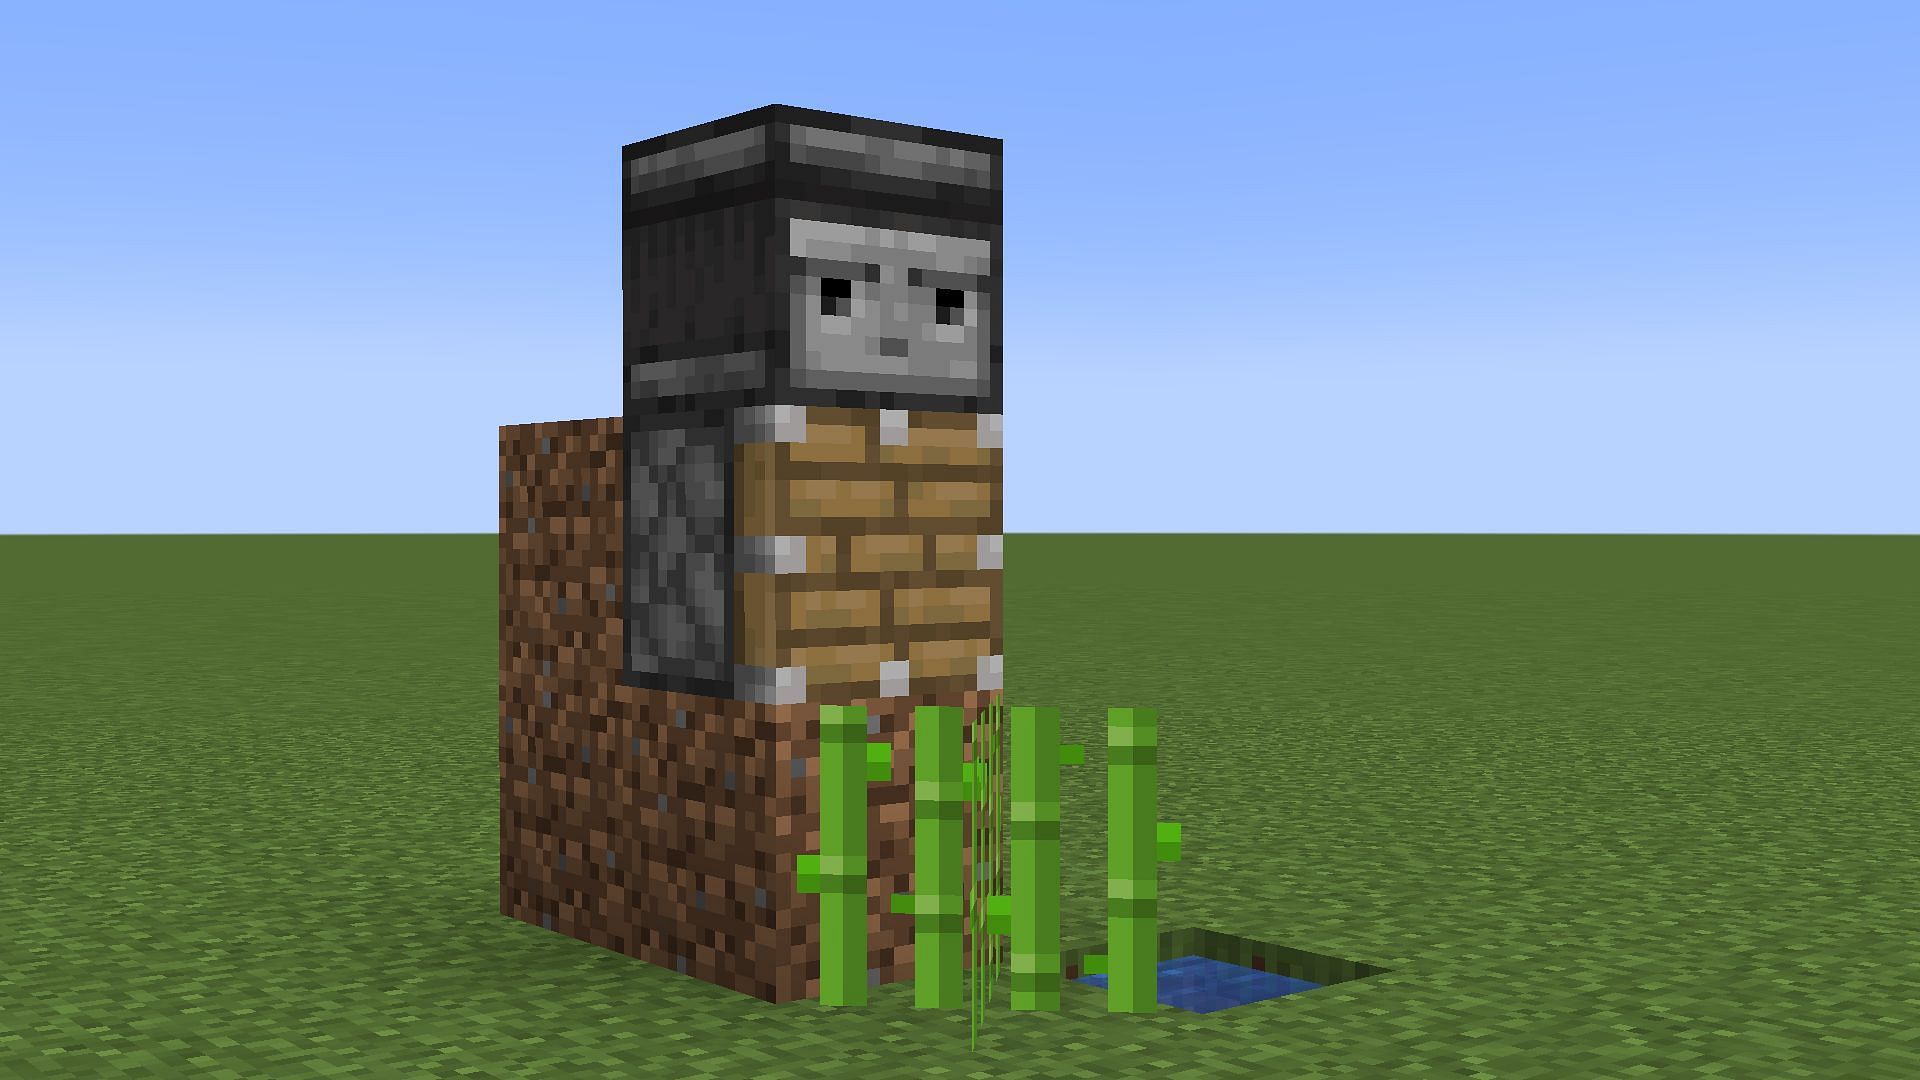 The simplest form of sugarcane farm in Minecraft (Image via Mojang)